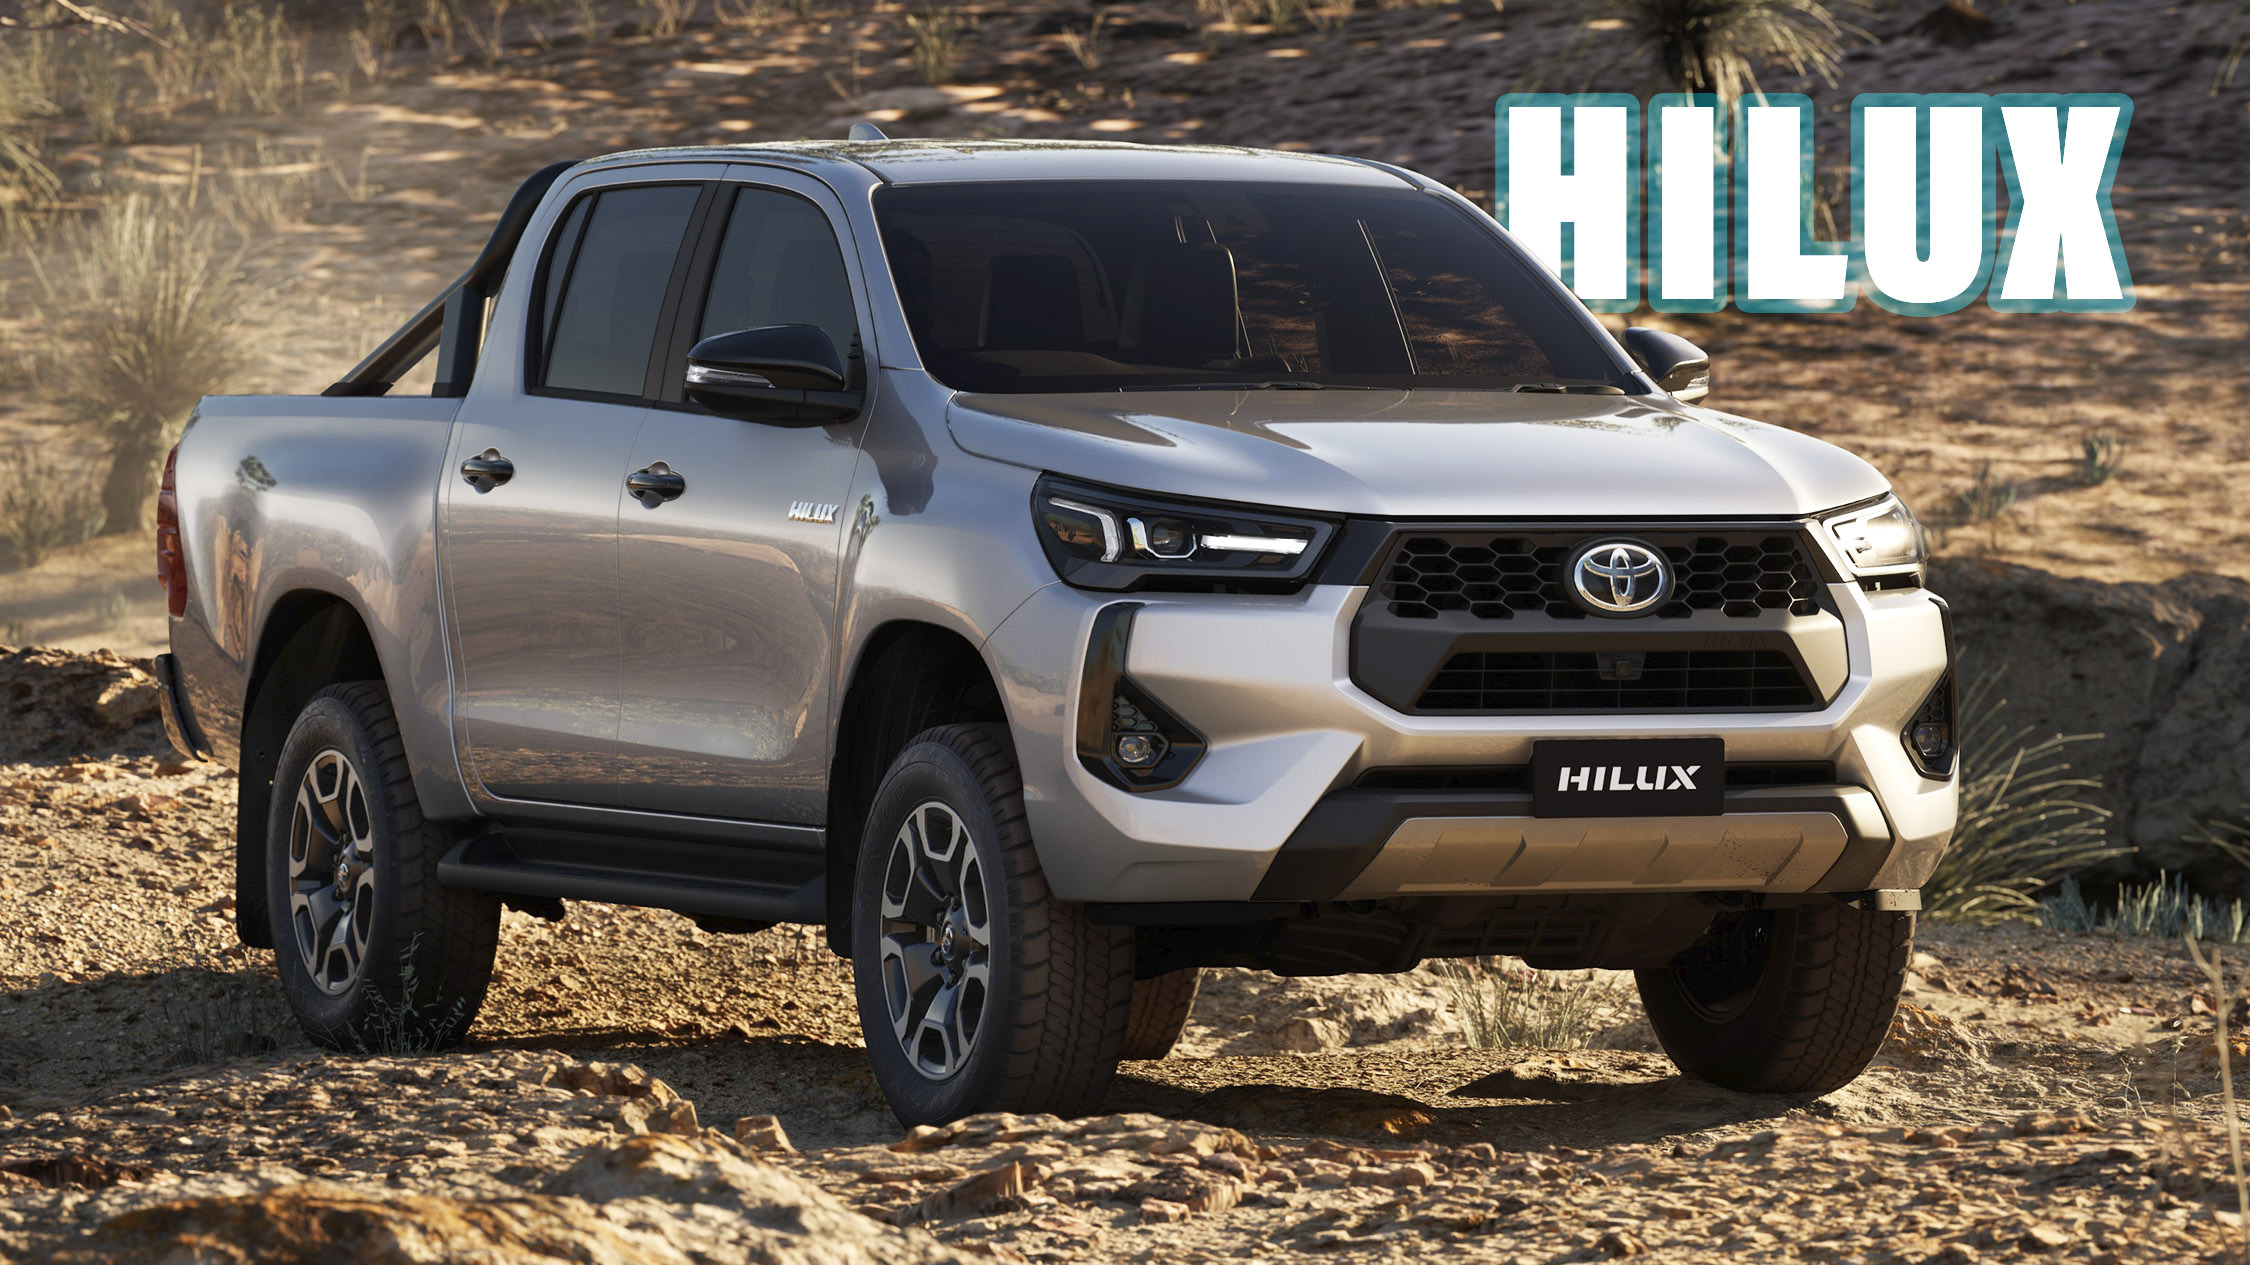 2024 Toyota Hilux Champ Pickup Debuts In Thailand As A $13,000